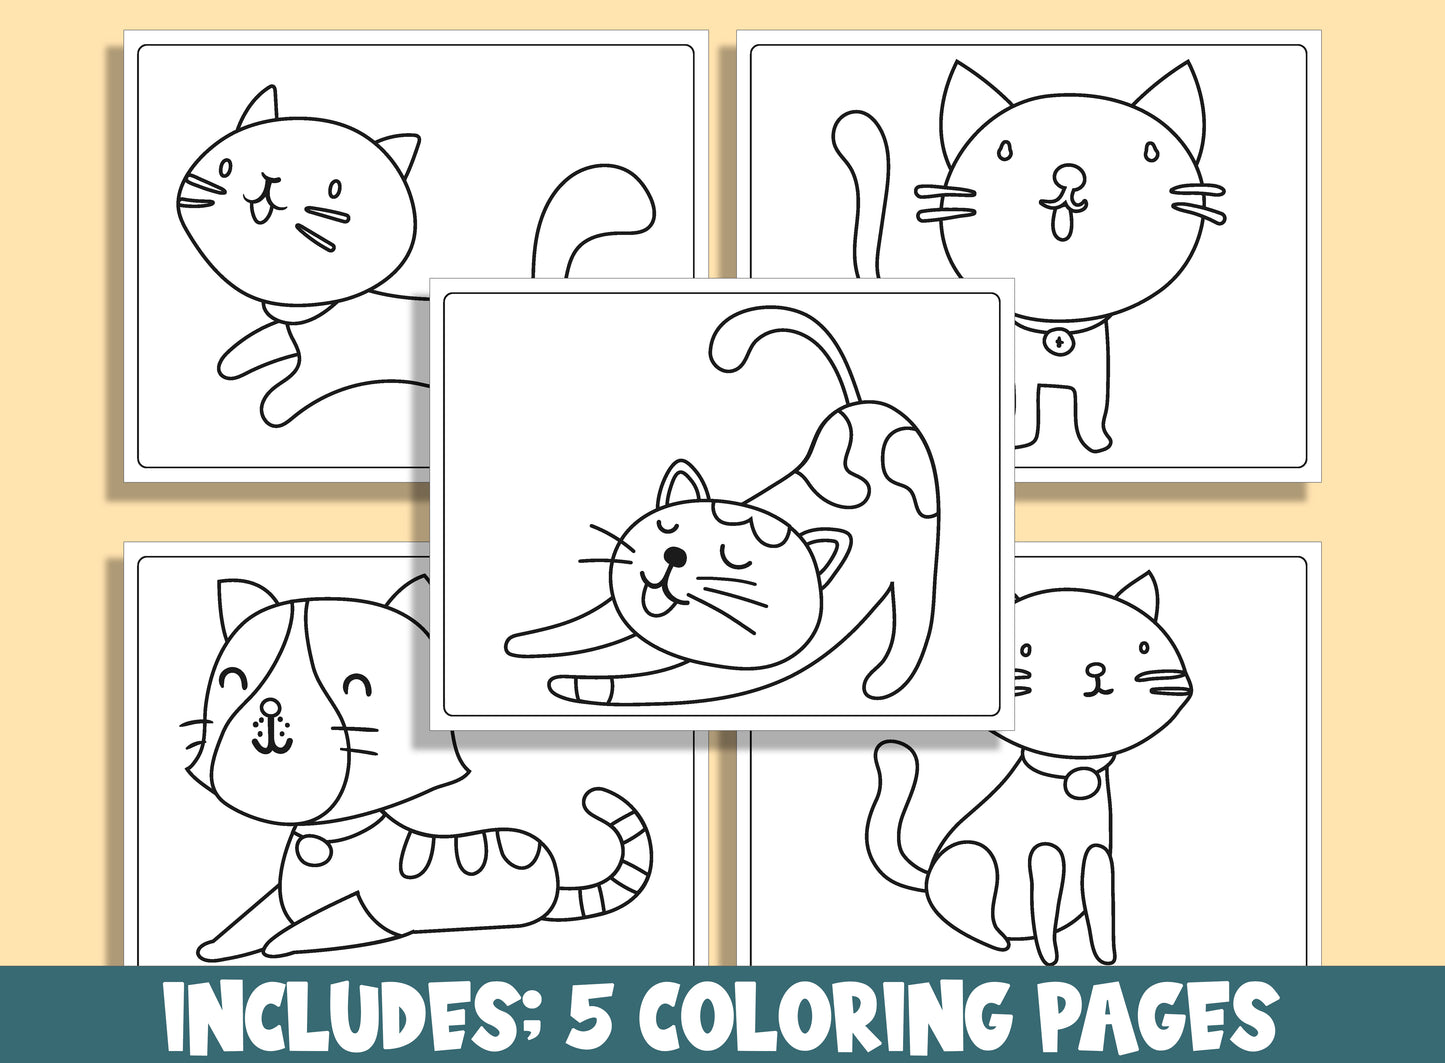 Learn How to Draw a Cute Cat, Kitten Directed Drawing Step by Step Tutorial + 5 Coloring Pages, PDF File, Instant Download